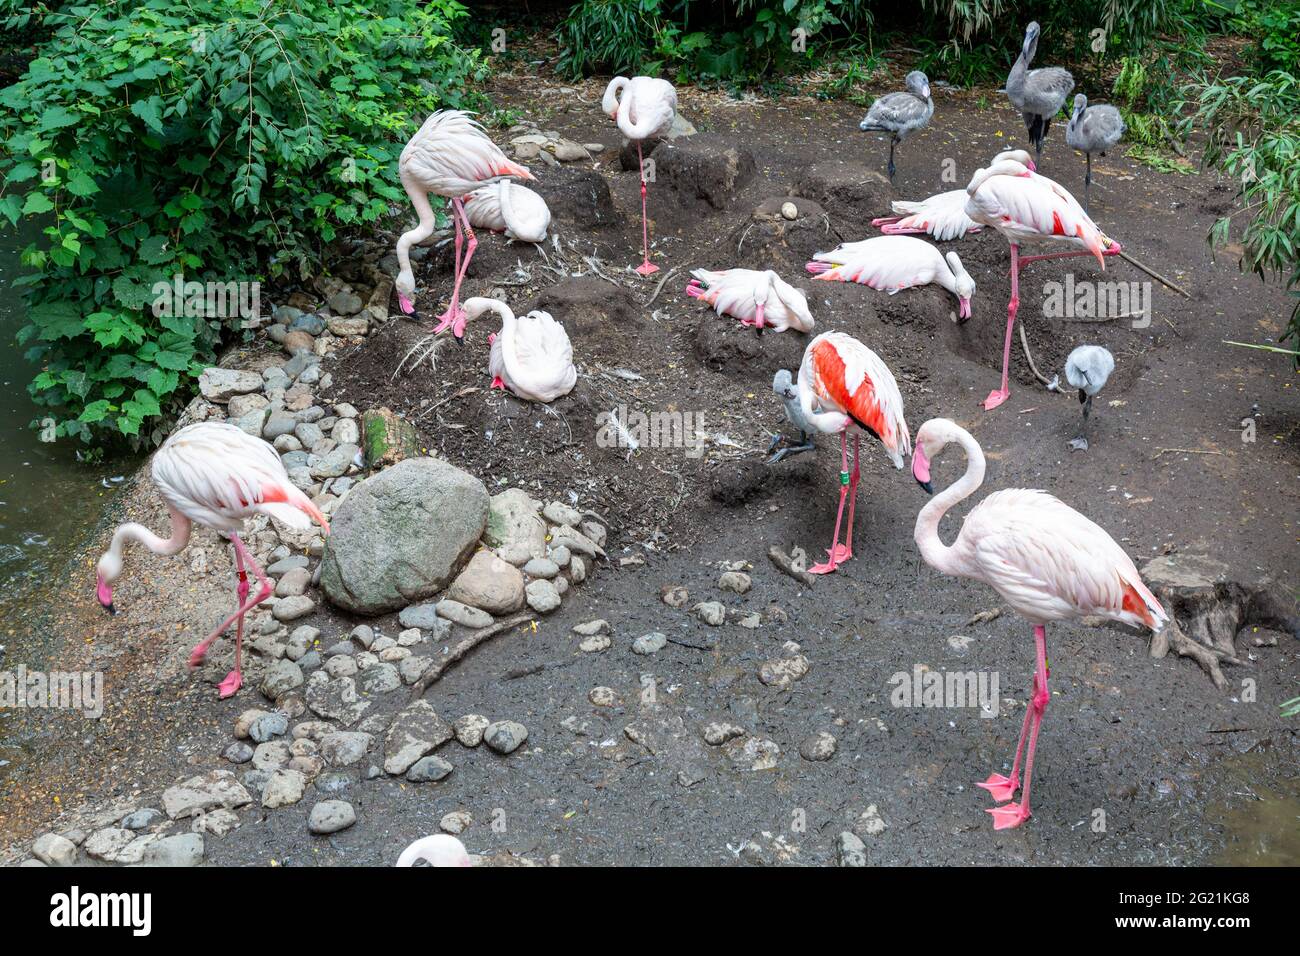 Flamingos of all ages, including an egg, at the Cincinnati Zoo Stock Photo